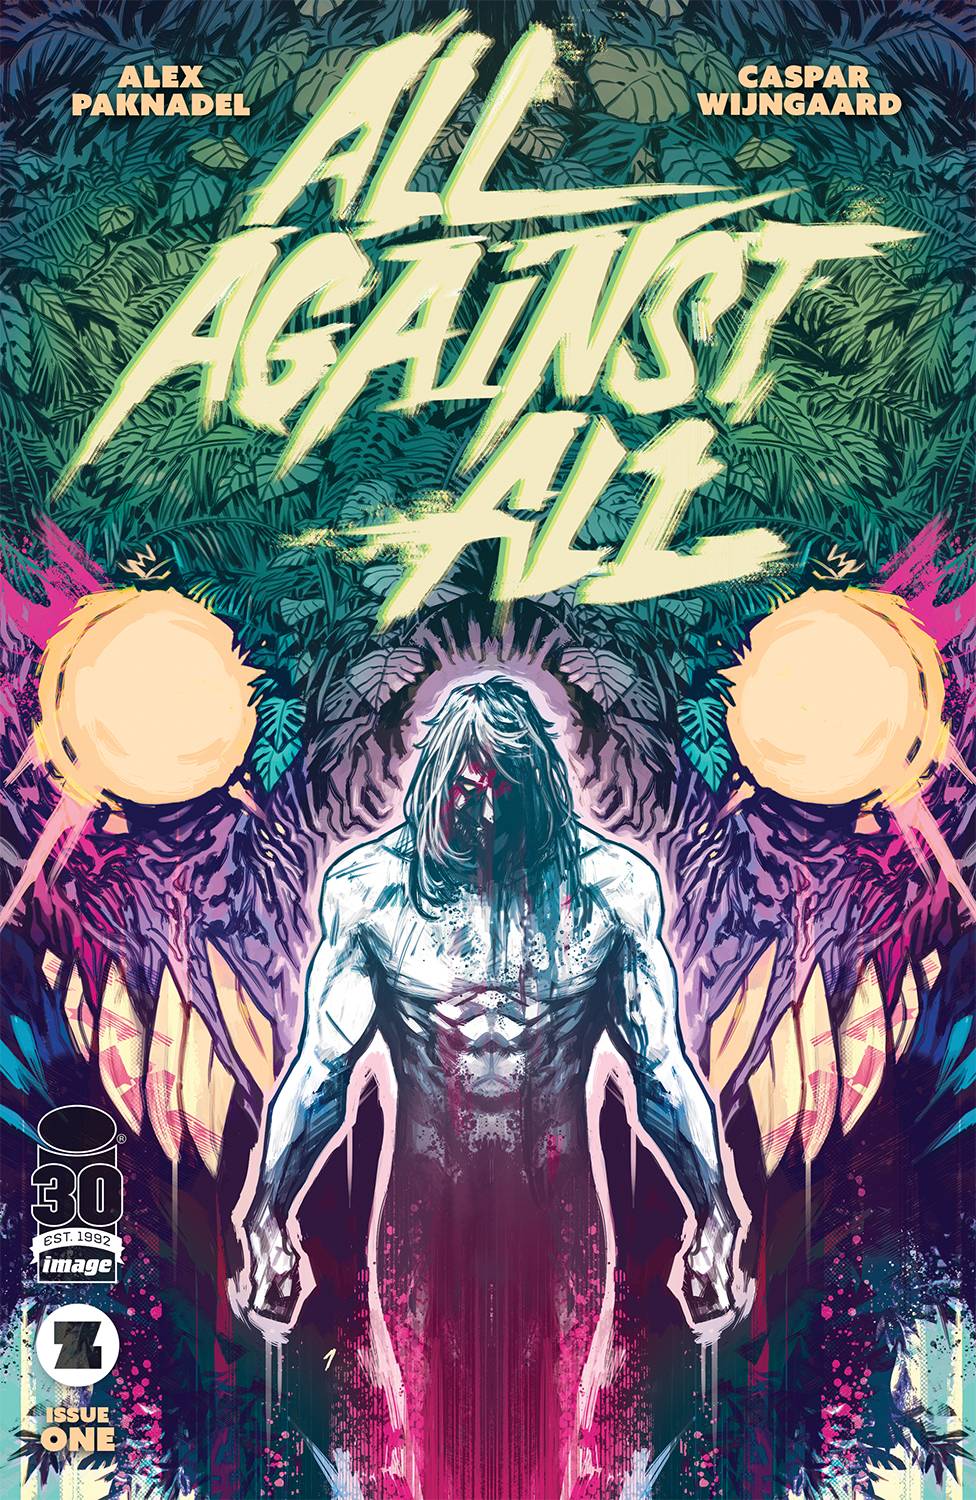 ALL AGAINST ALL #1 (OF 5) CVR A SIGNED BY ALEX PAKNADEL